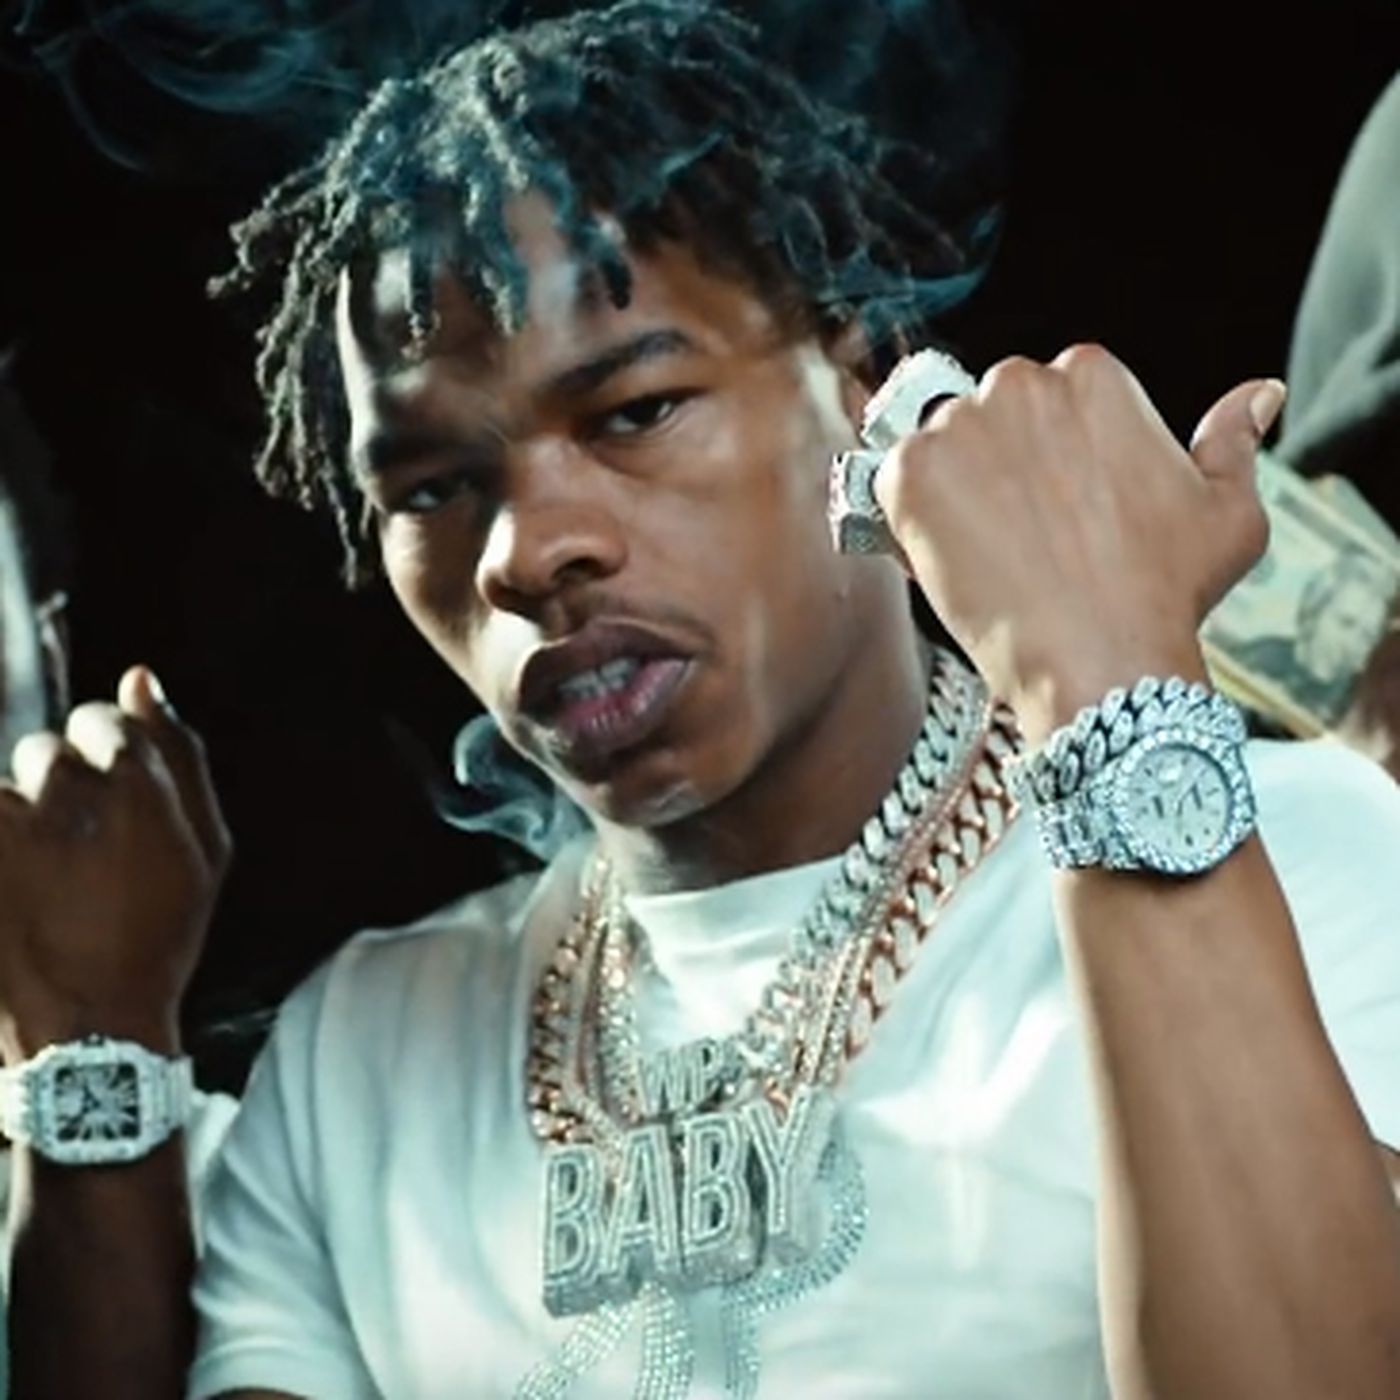 Lil Baby Feat. Lil Wayne “Forever” (Video)